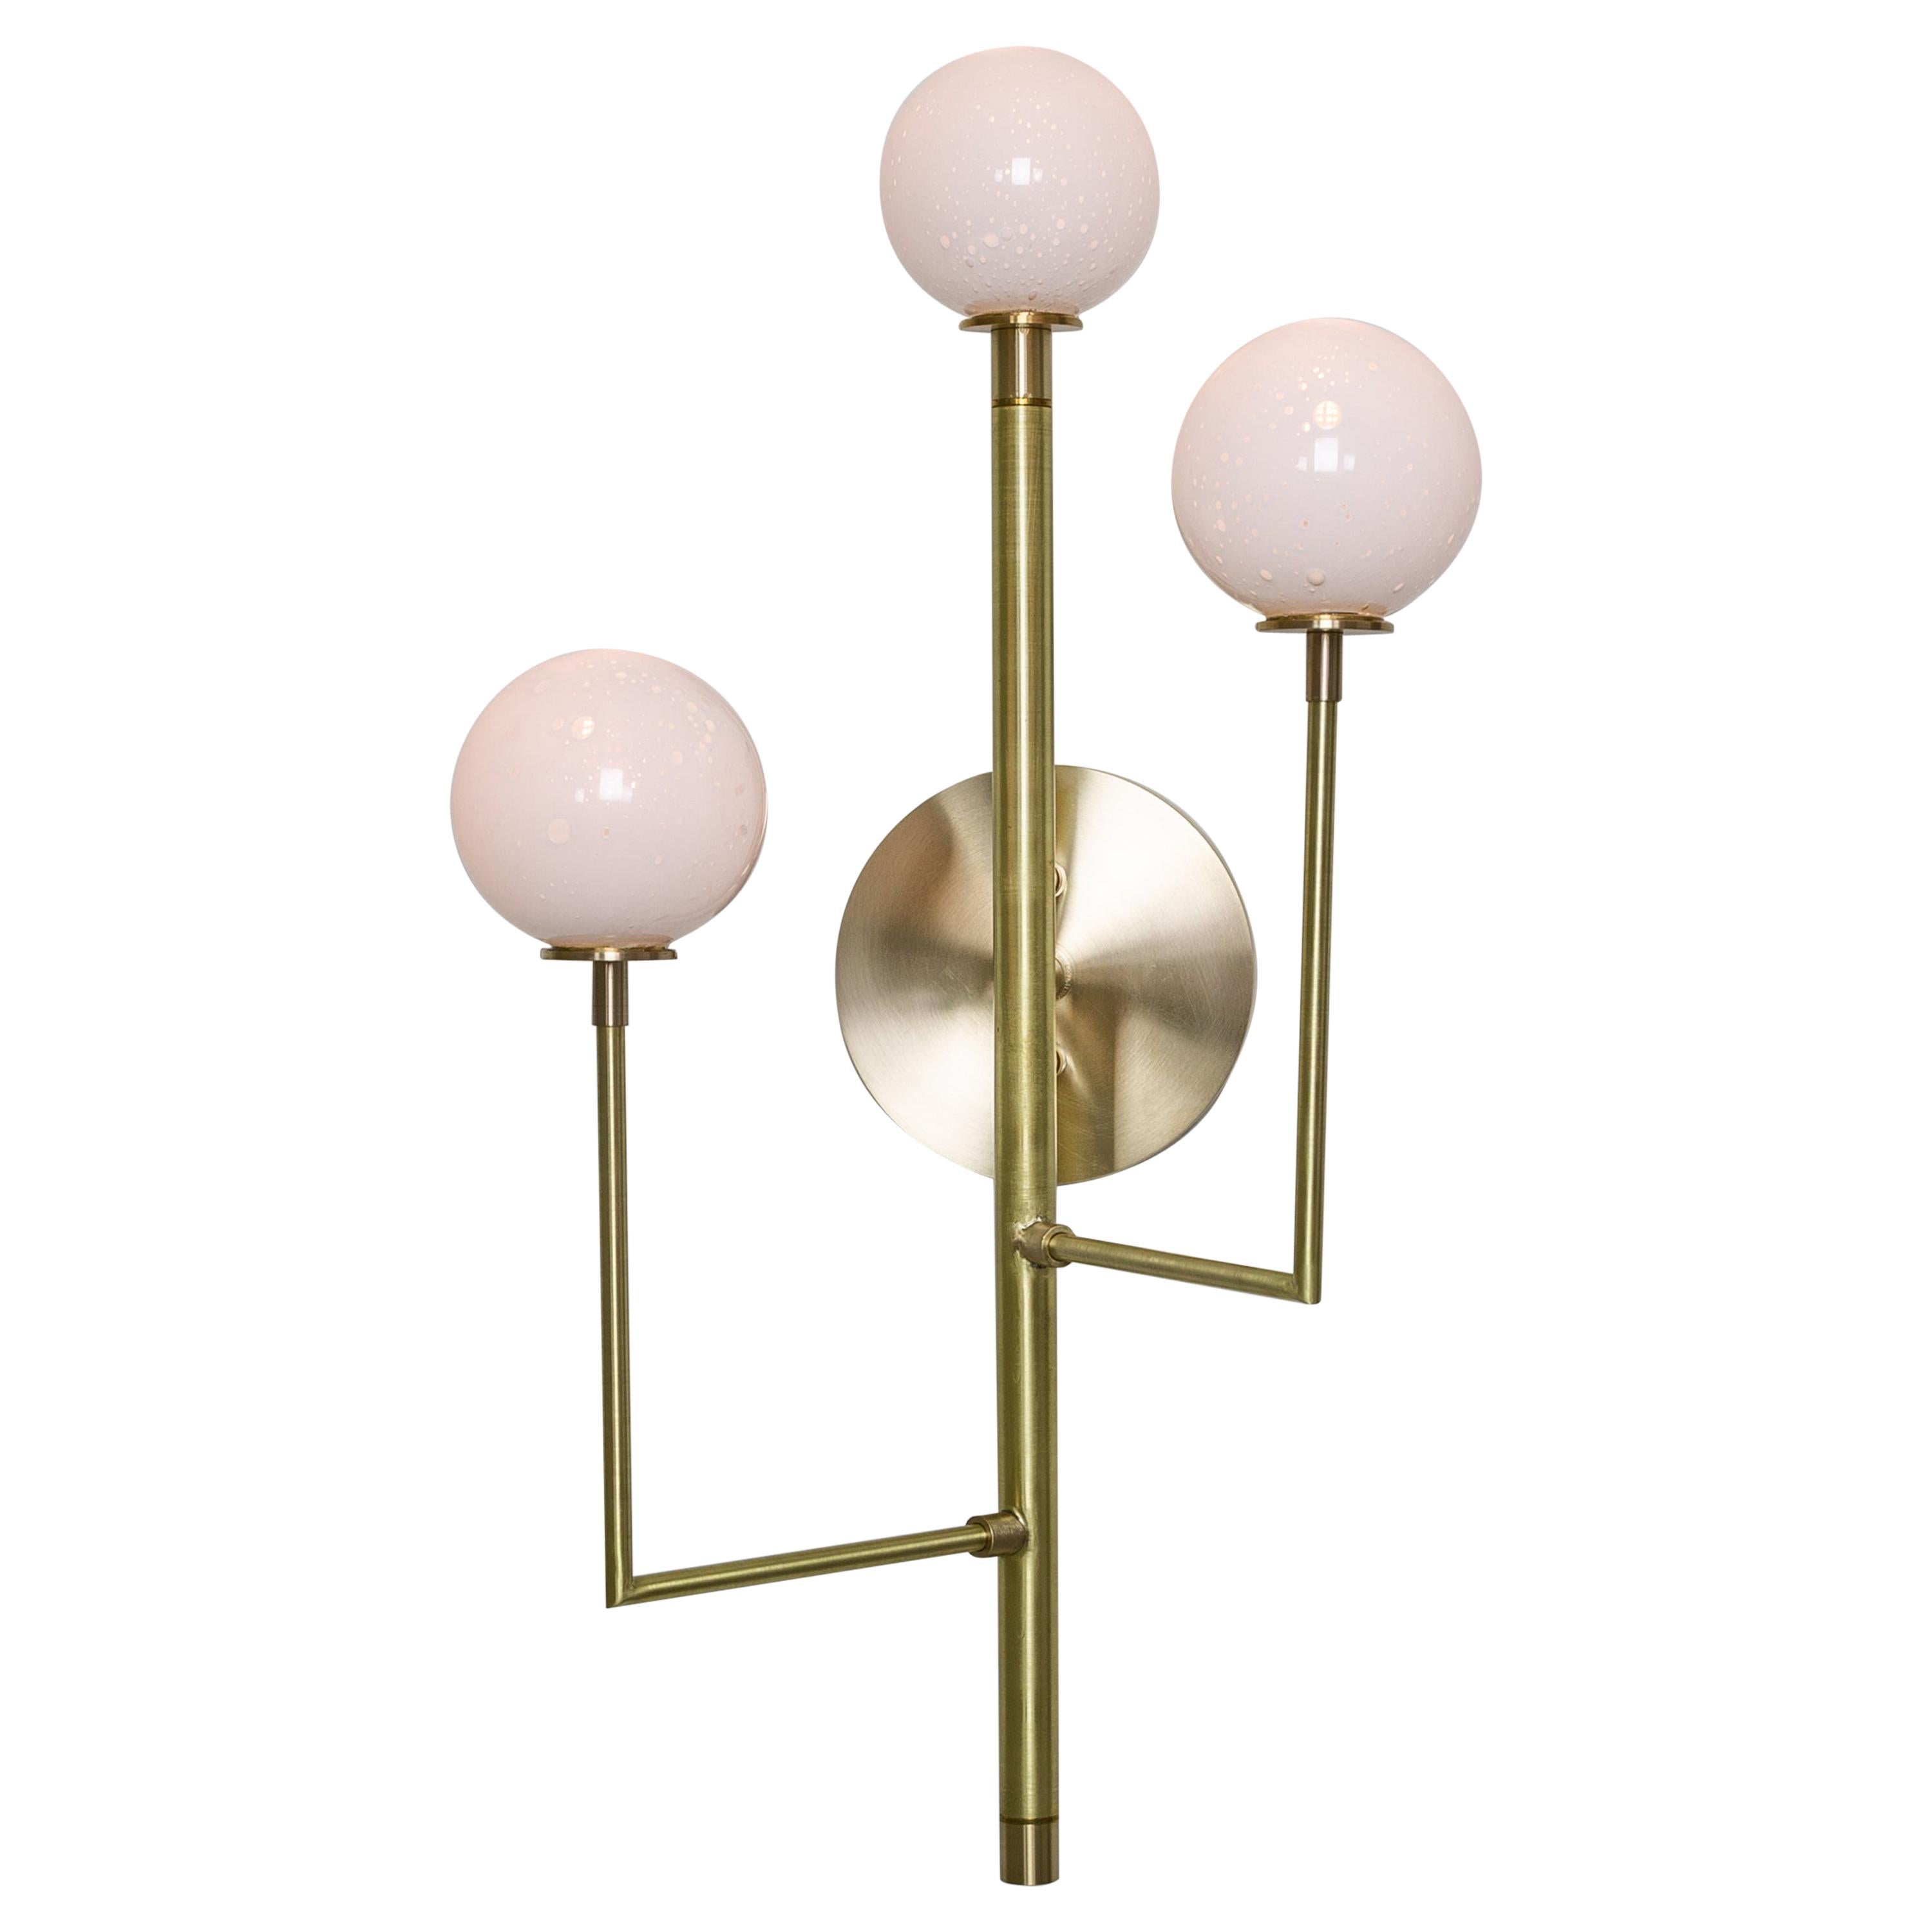 Halo Sconce 3:: Brass:: Hand Blown Glass Contemporary Wall Sconce:: Kalin Asenov